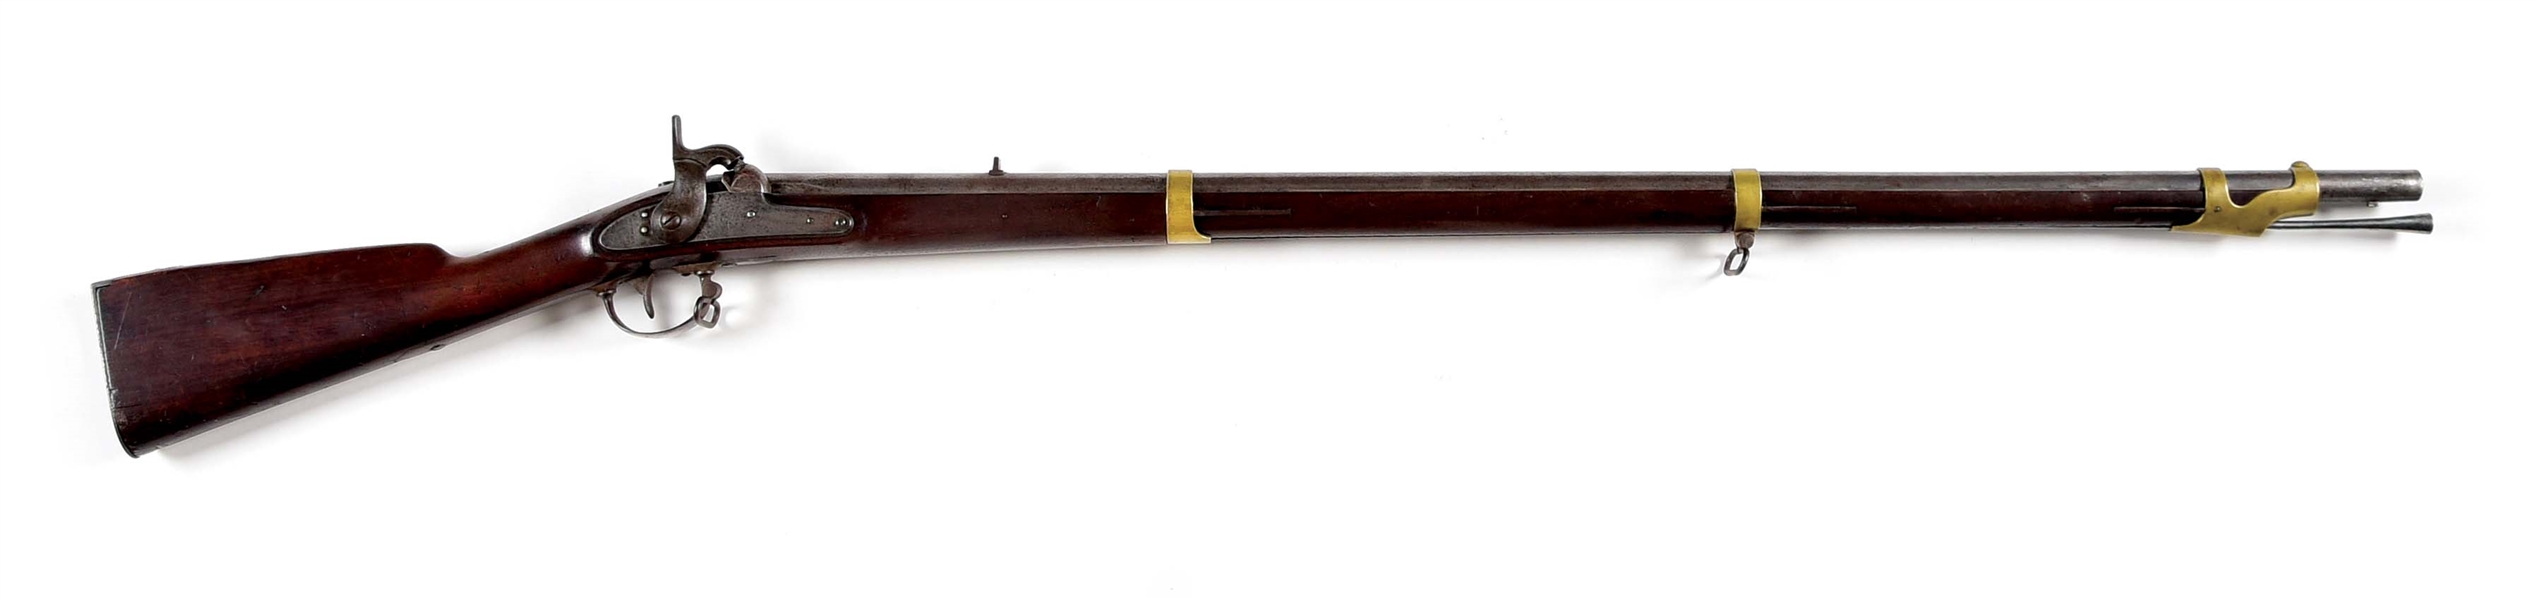 (A) FINE AND RARE PALMETTO ARMORY 1842 PATTERN RIFLED MUSKET, DATED 1852.